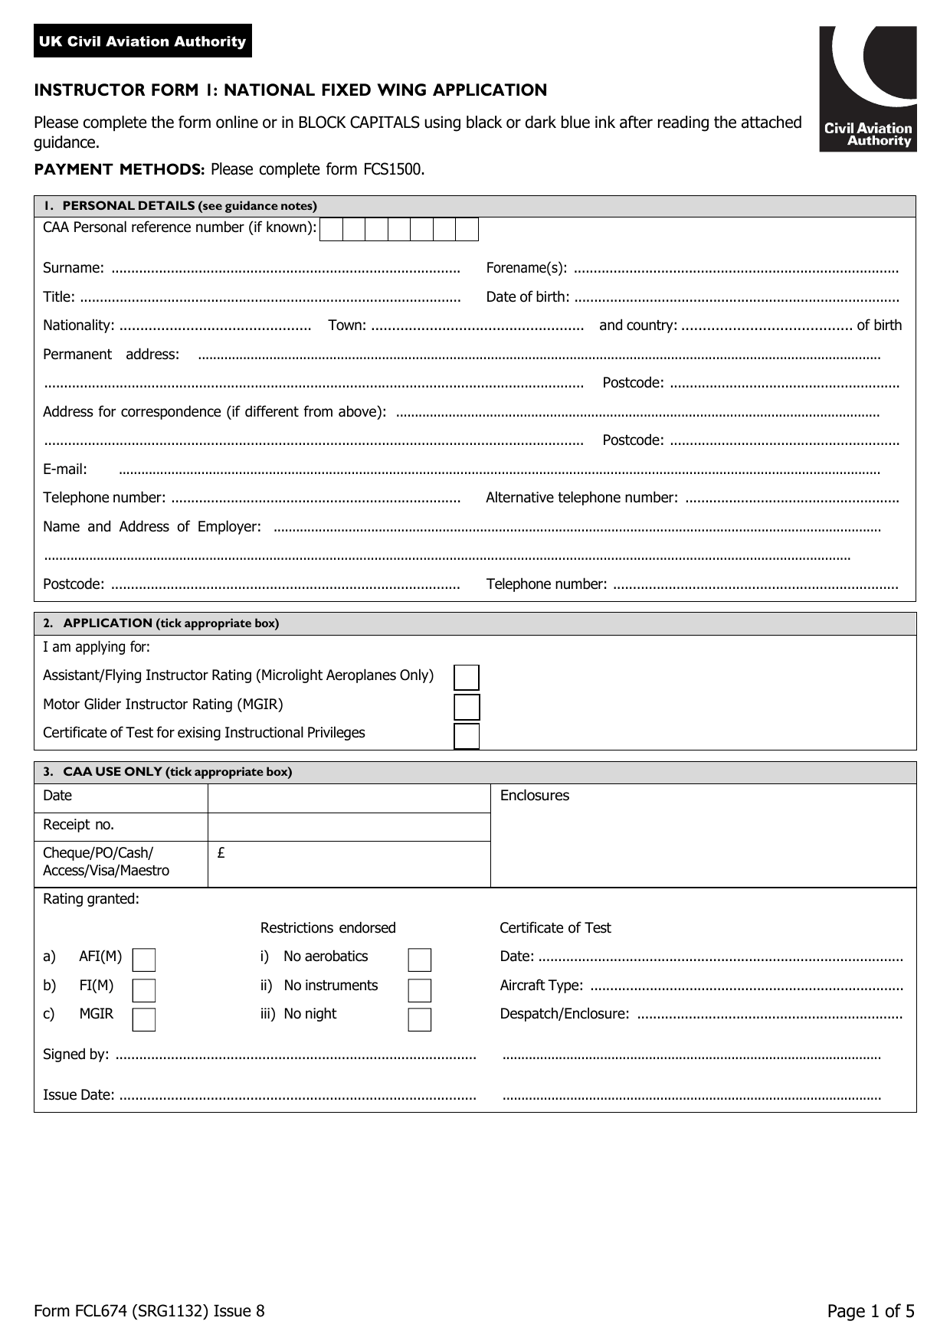 Instructor Form 1 (FCL674; SRG1132) National Fixed Wing Application - United Kingdom, Page 1